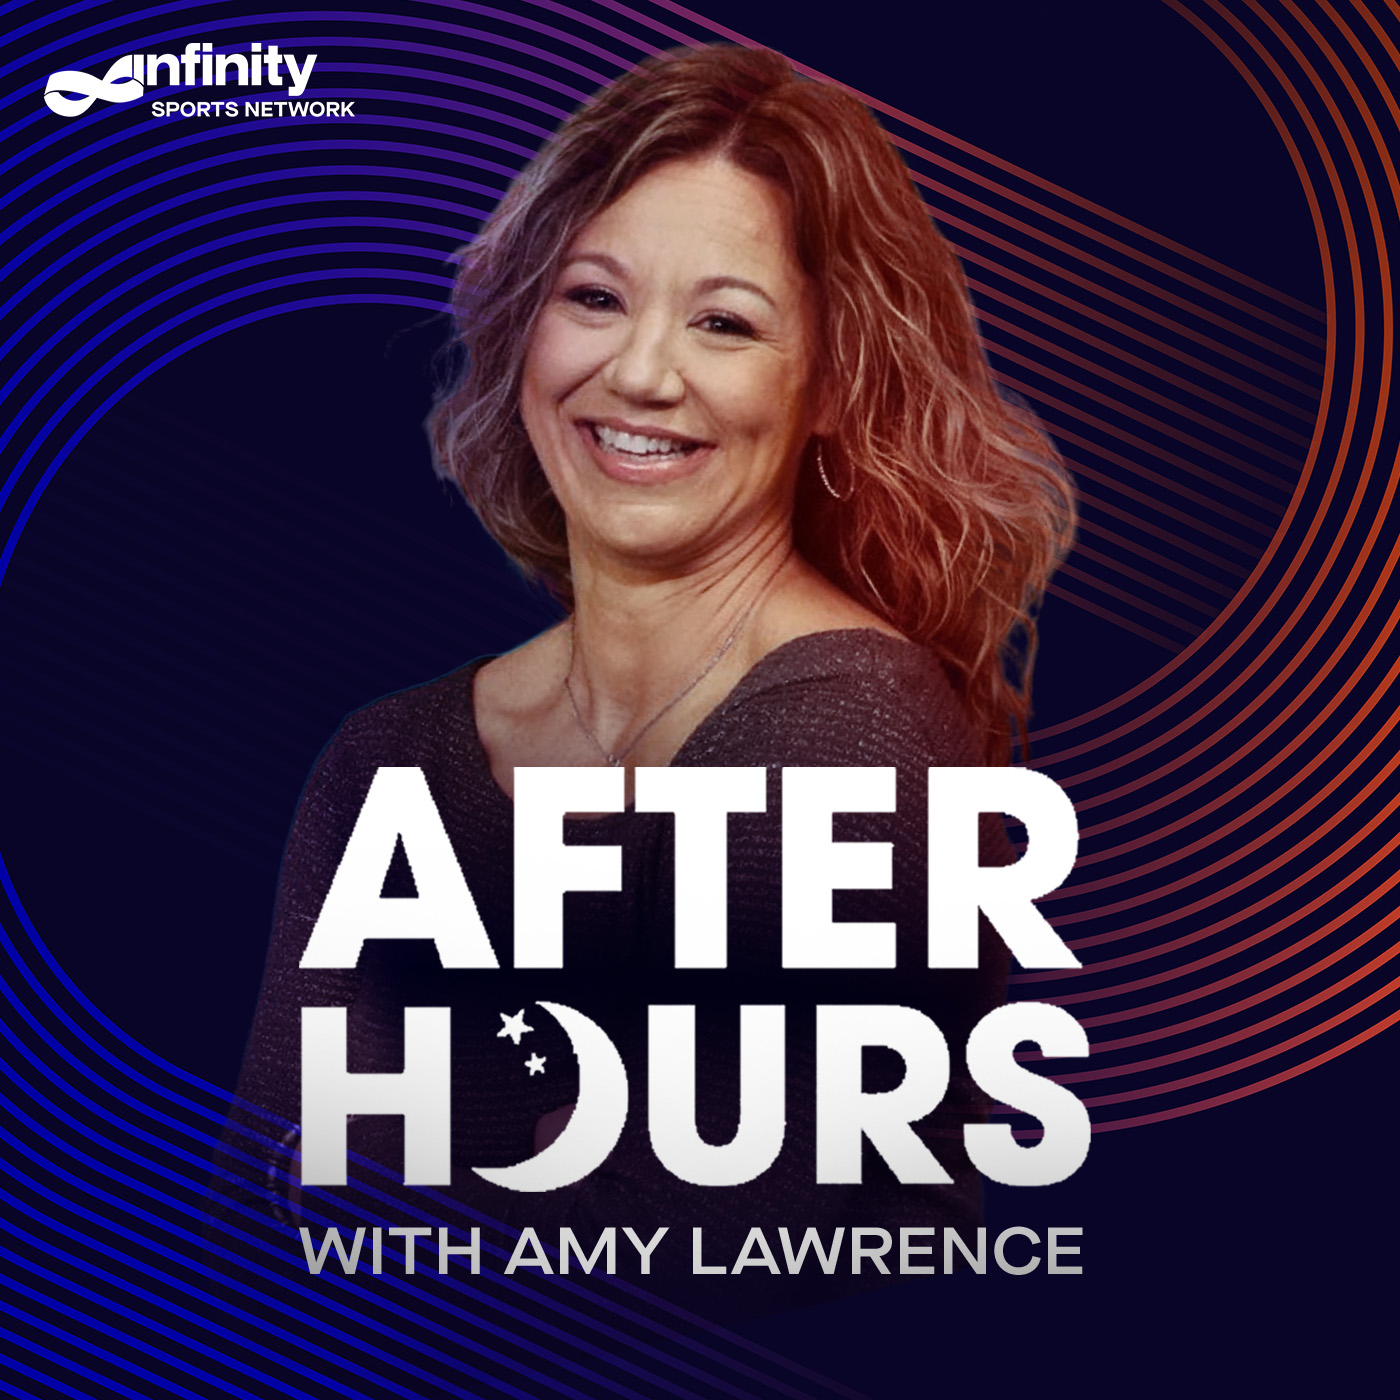 10-14-21 After Hours with Amy Lawrence PODCAST: Hour 1